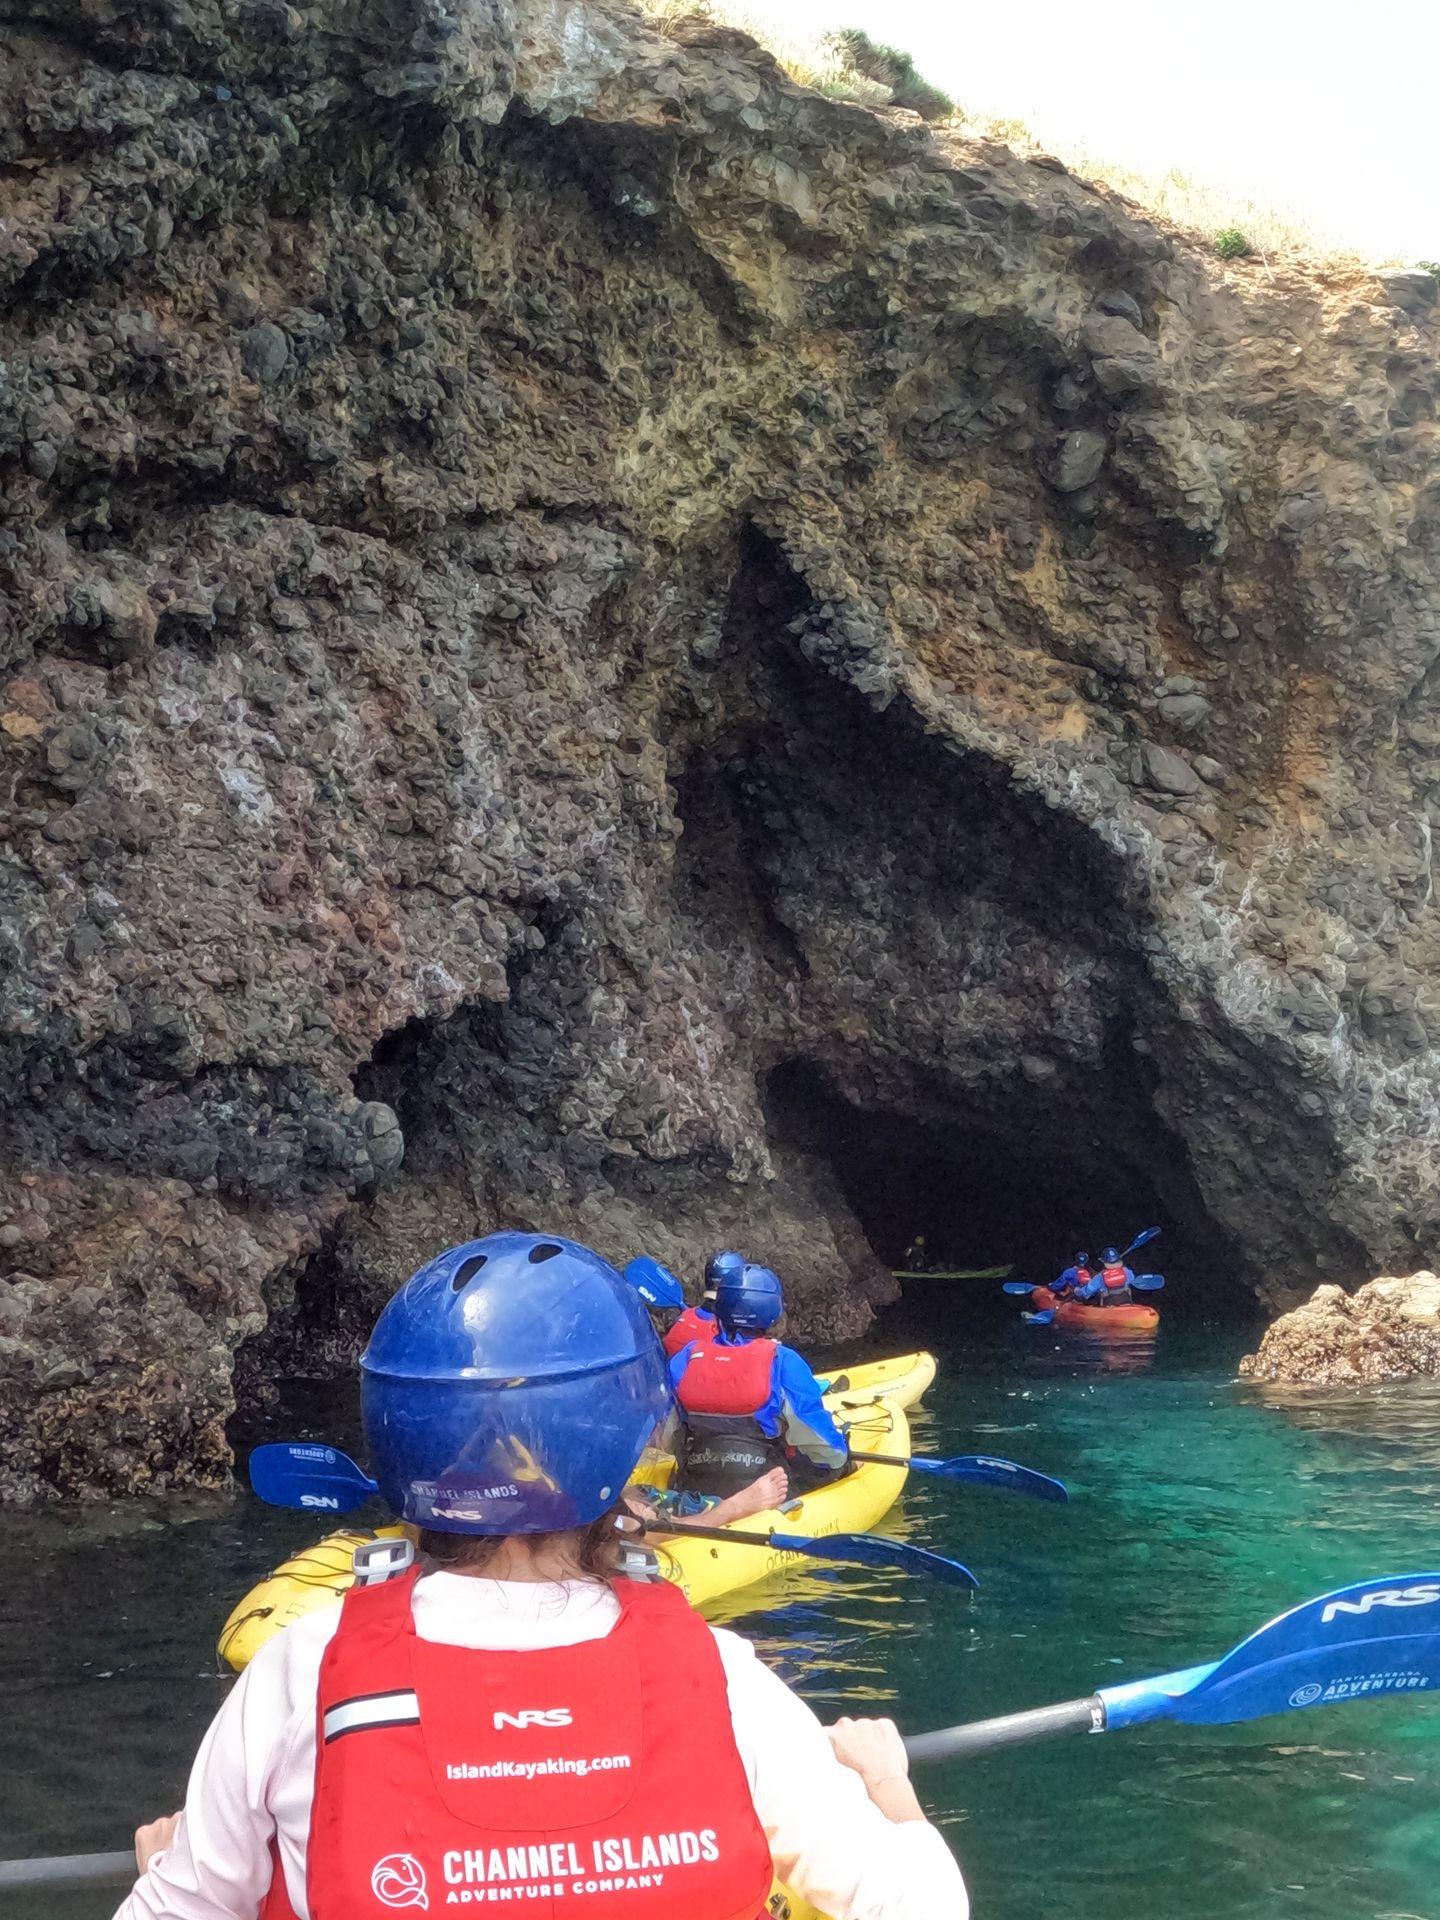 A line of kayaks heading into a sea cave